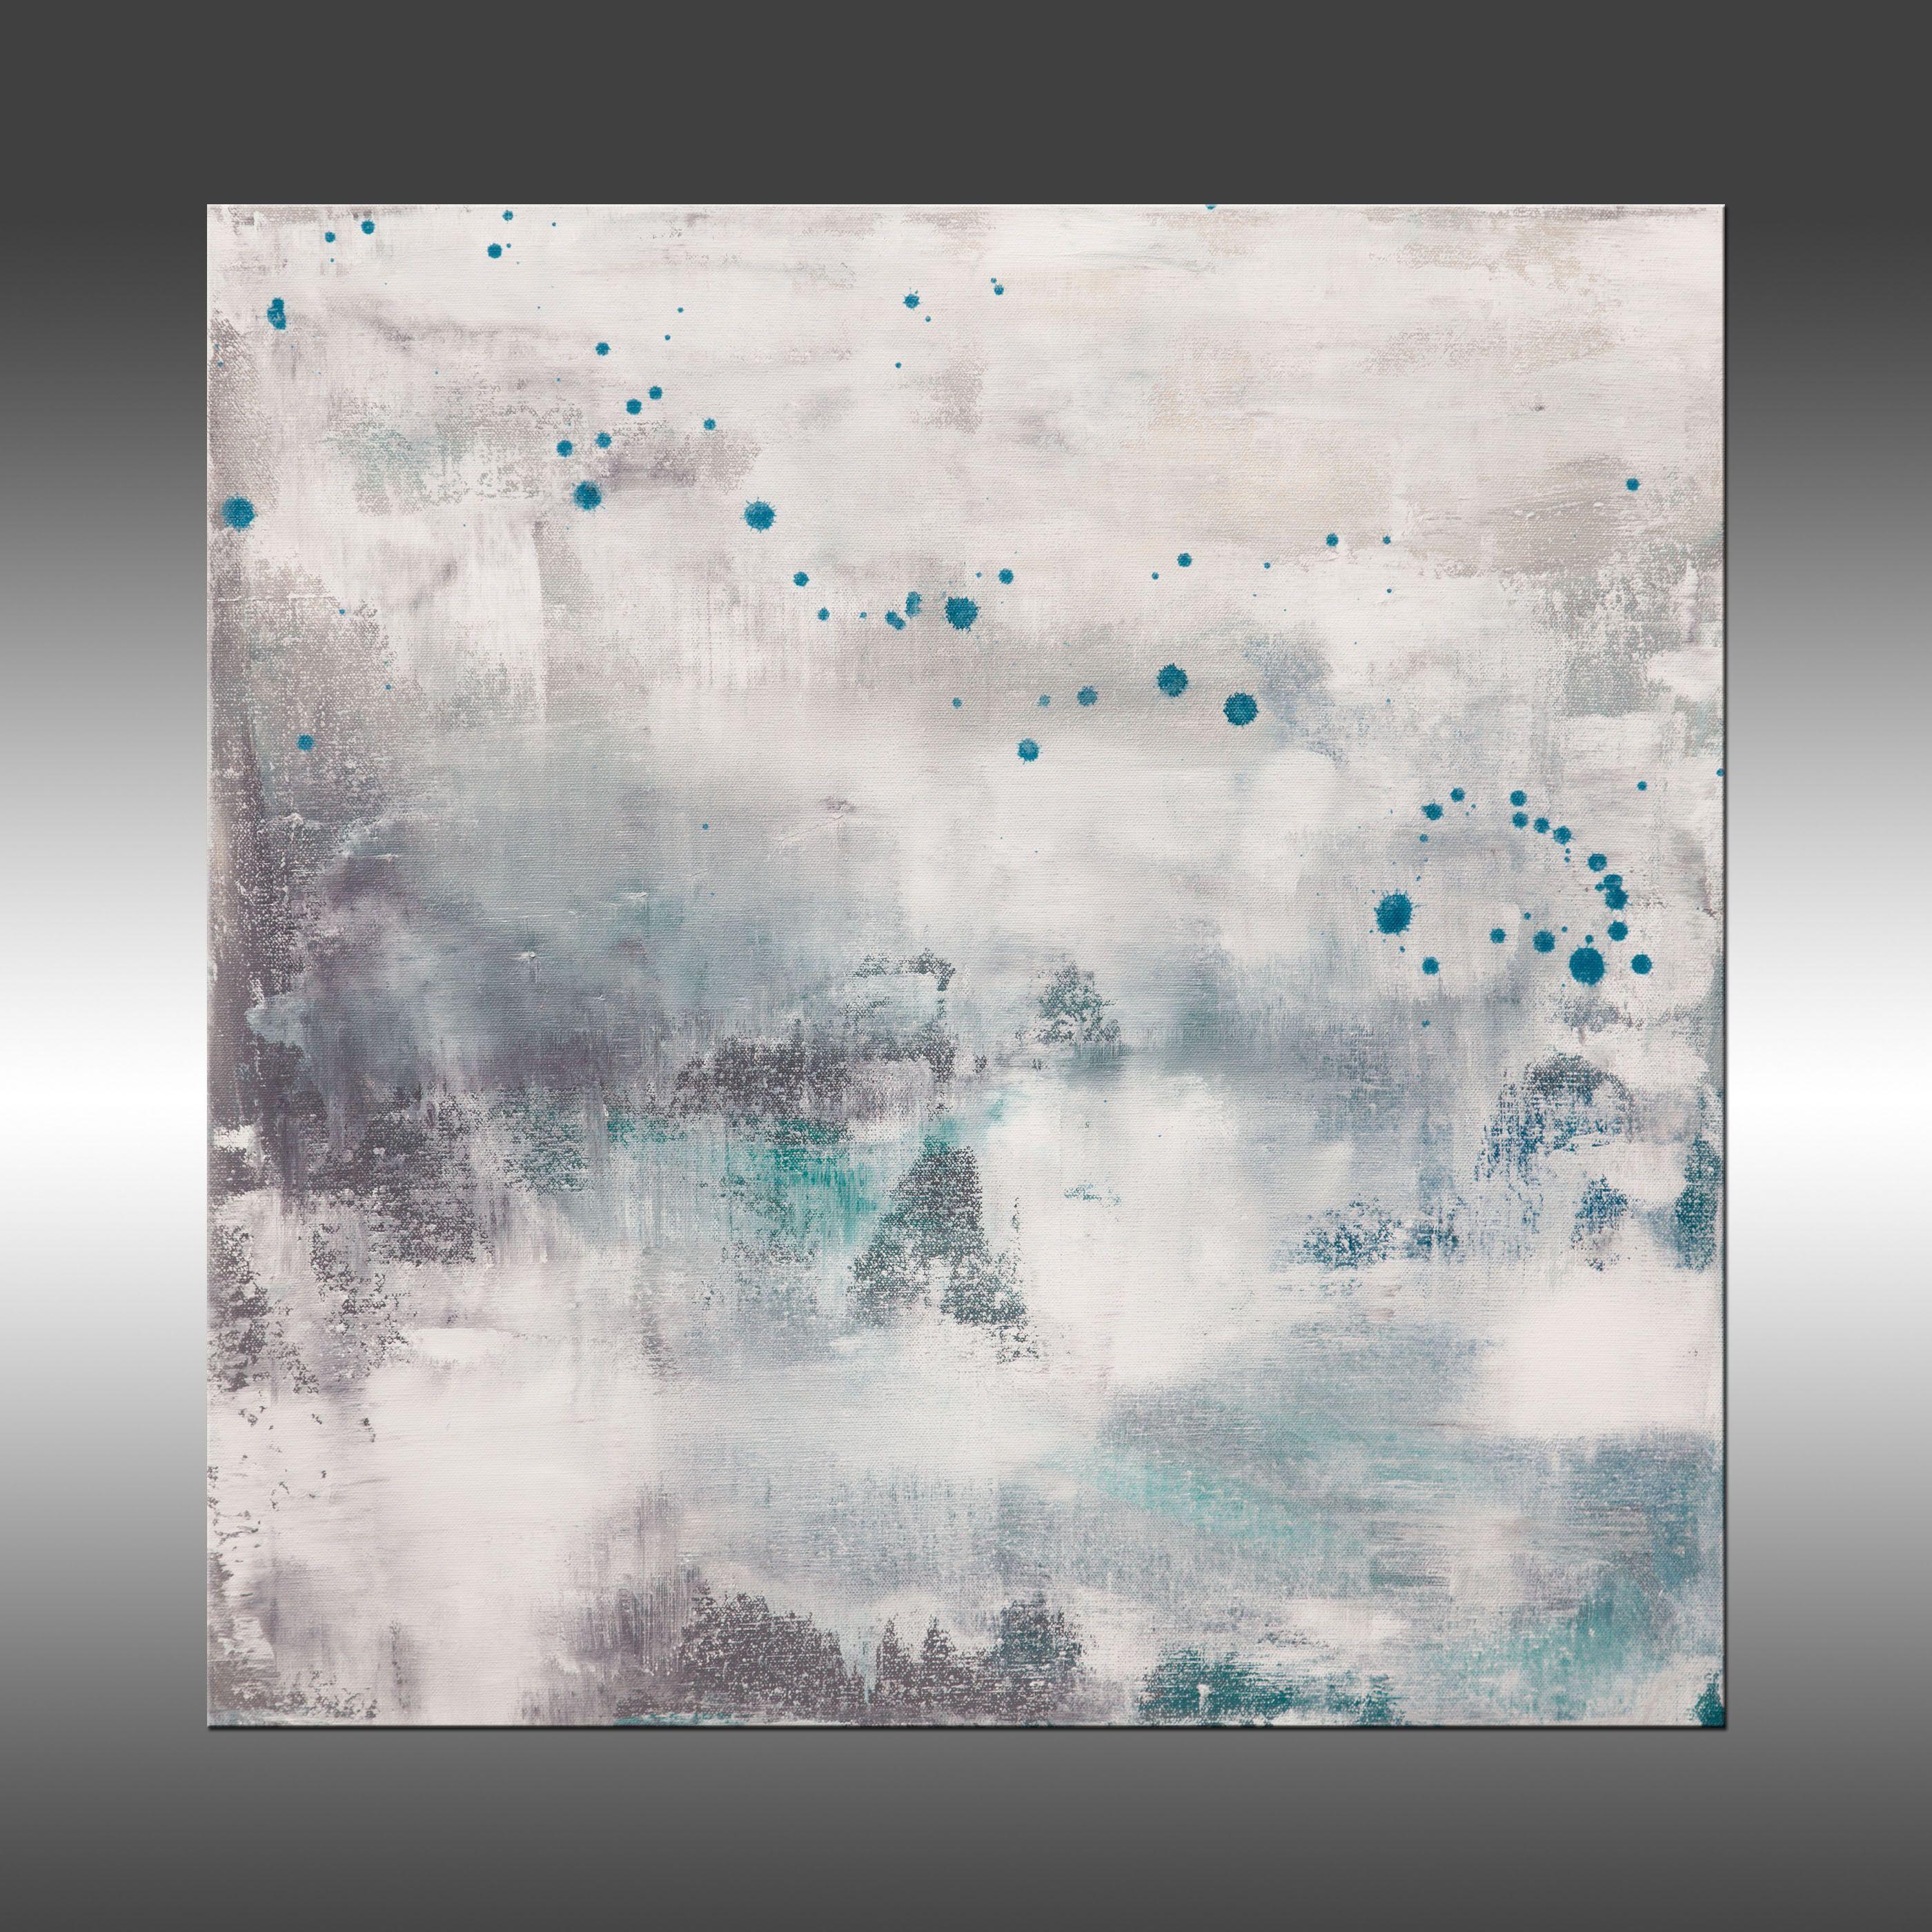 Sea Spray 6 is an original painting, created with acrylic paint on gallery-wrapped canvas. It has a width of 24 inches and a height of 24 inches with a depth of 1.5 inches (24x24x1.5).    The colors used in the painting are white, gray, off-white,